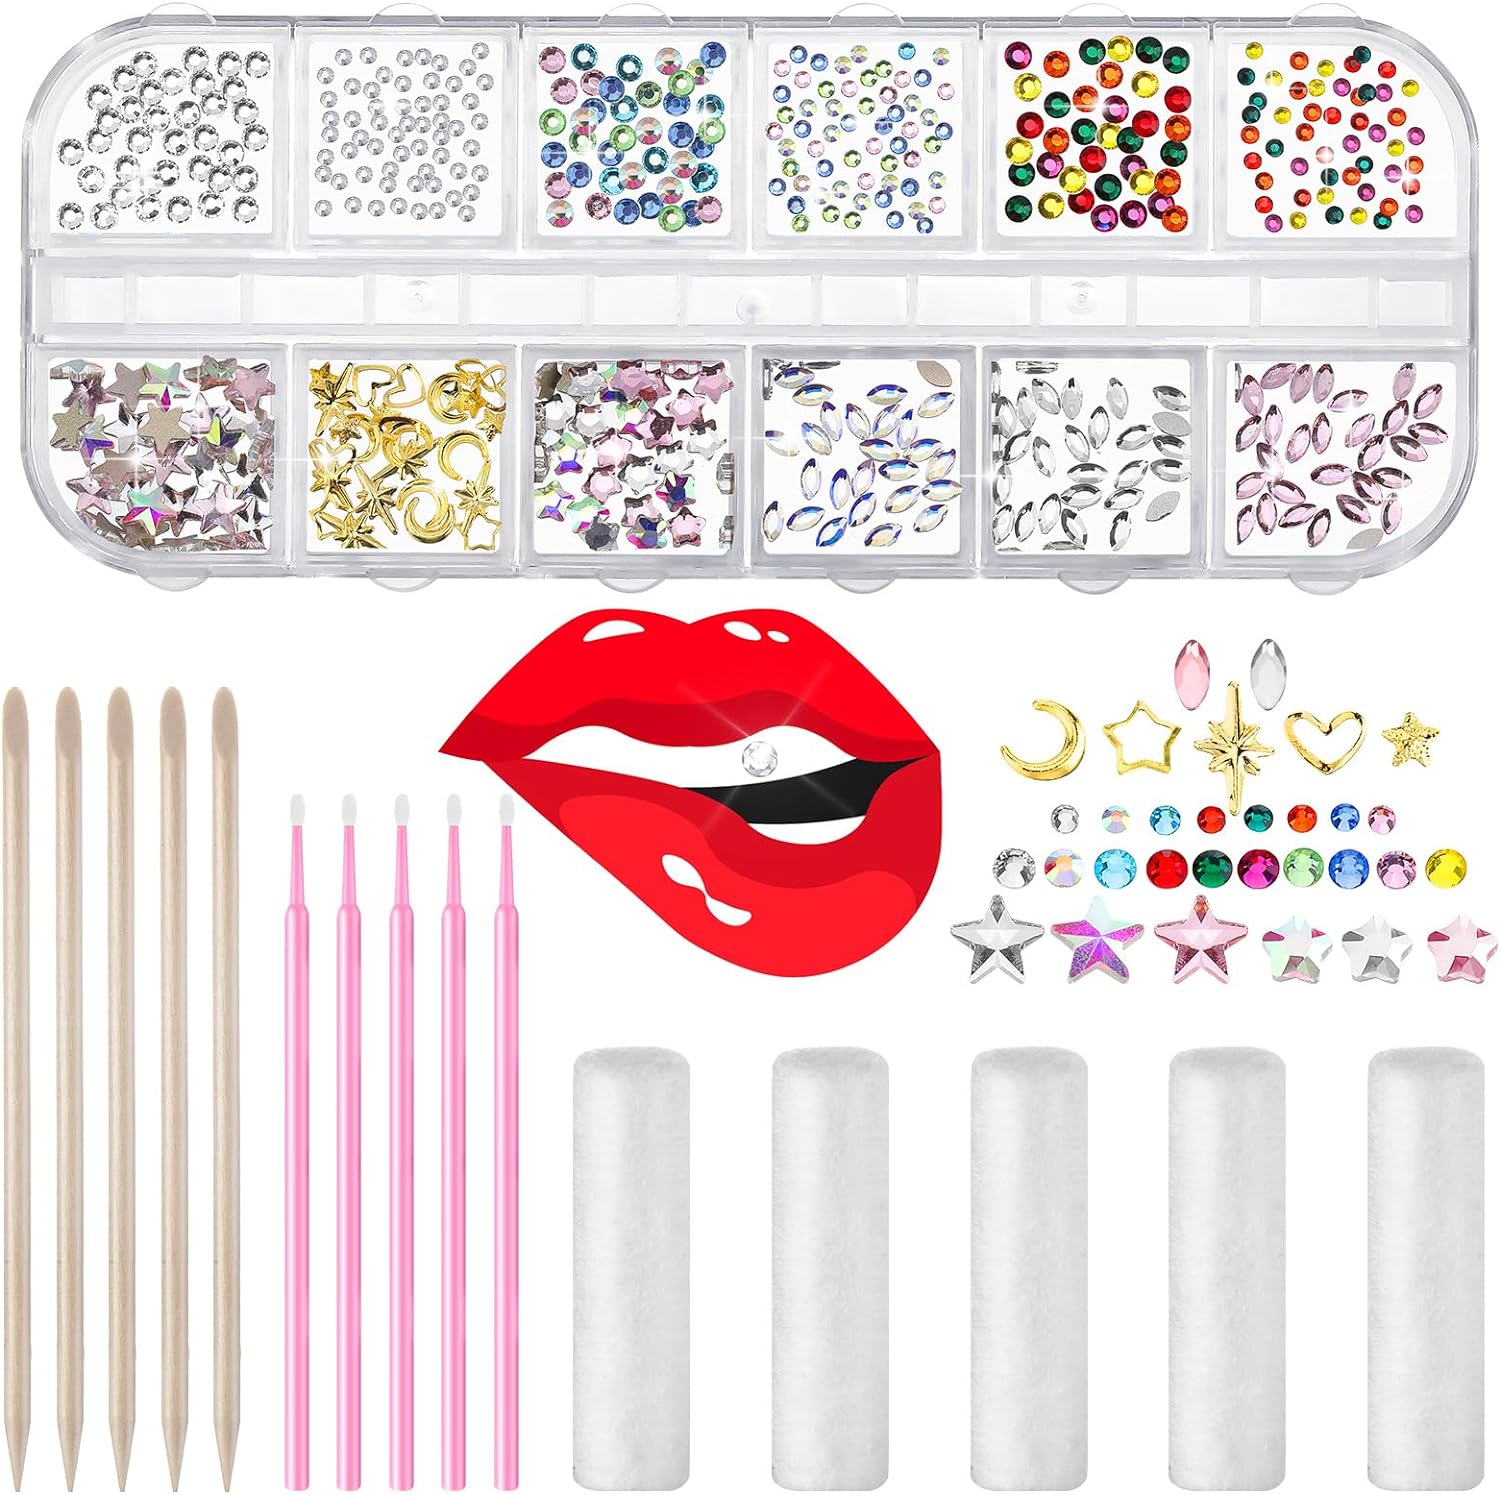 POPETPOP Teeth Jewelry Tooth Gems Kit Removable Tooth Ornaments Teeth  Diamond for DIY Tooth Decor Nails Decor 10pcs White